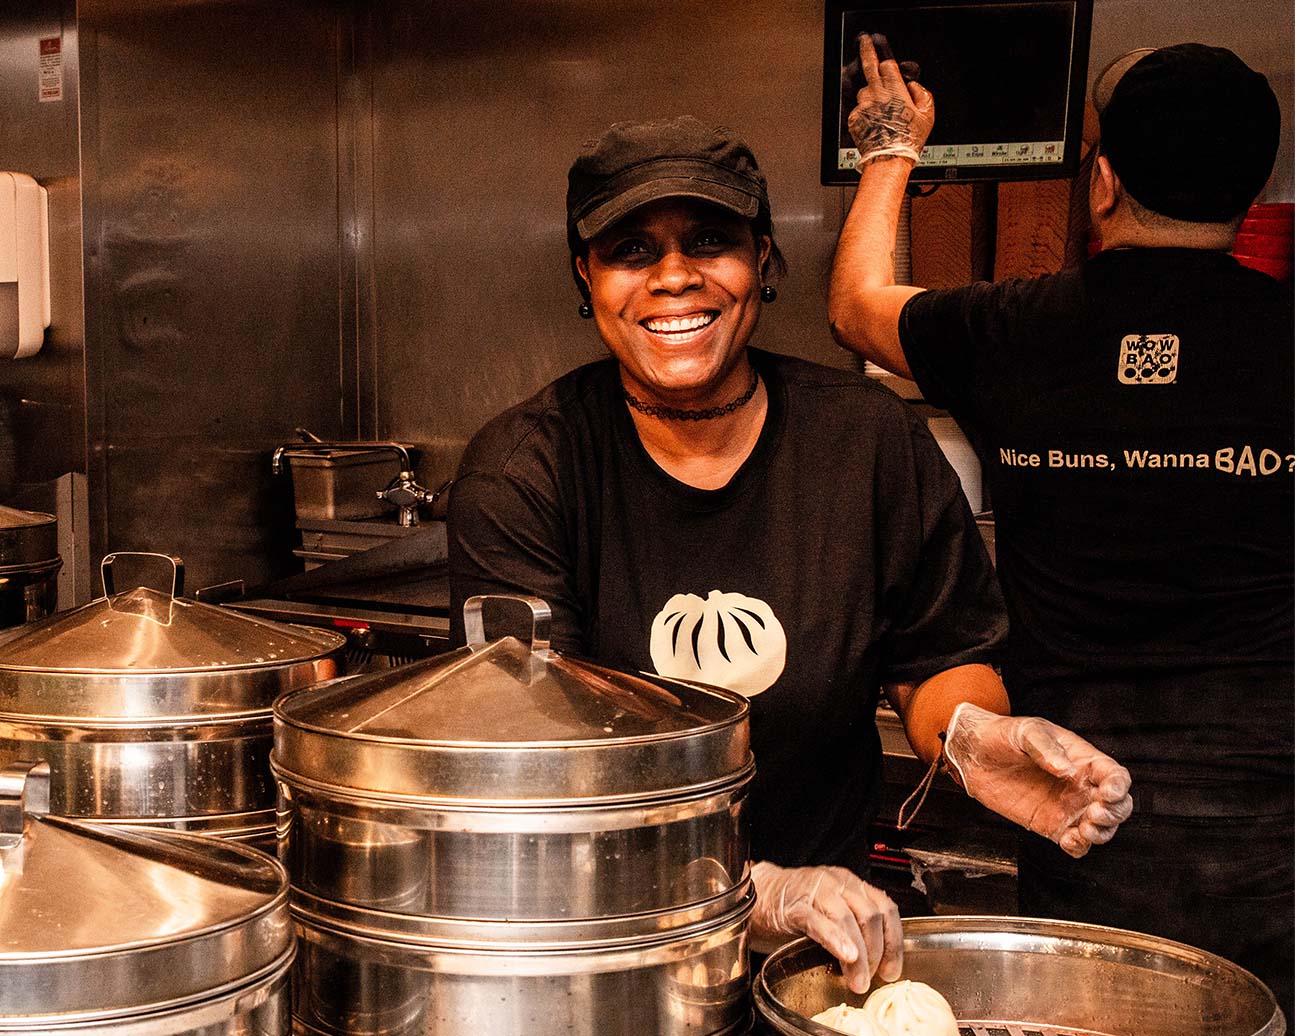 A Wow Bao team member, wearing a Wow Bao shirt, smiling towards the camera in front of metal steamers.